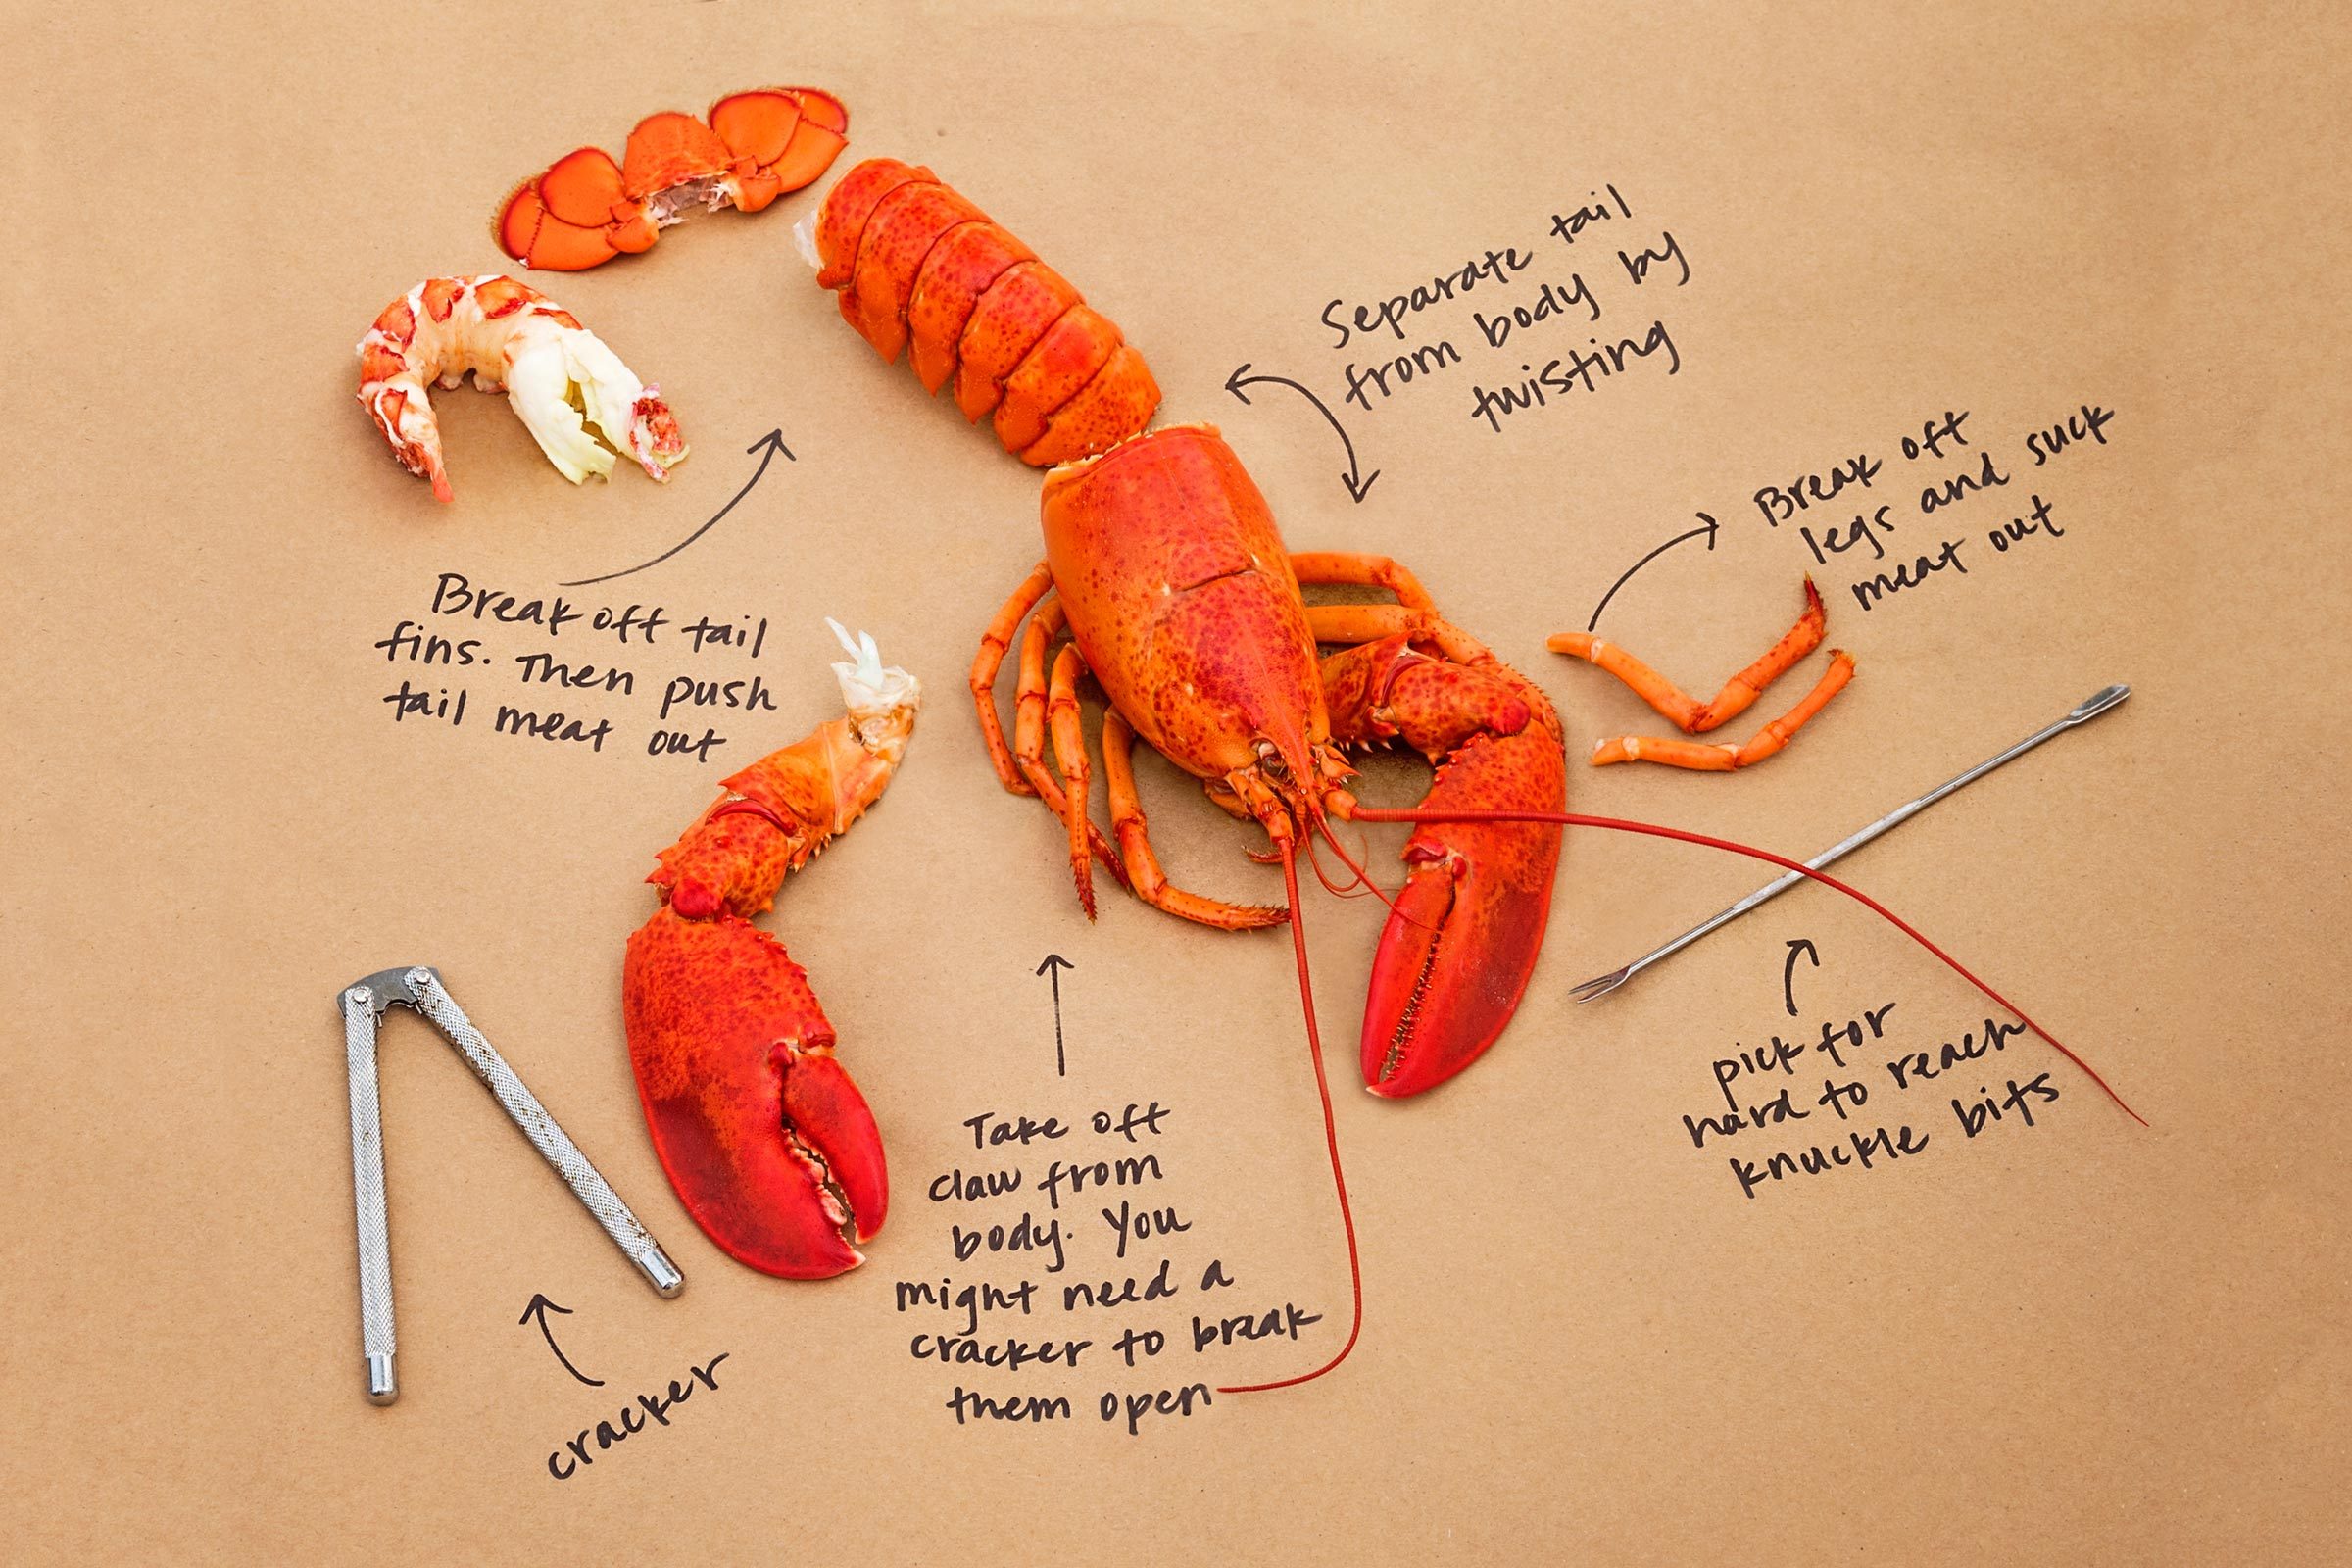 Don't Throw Away the Lobster Shells!